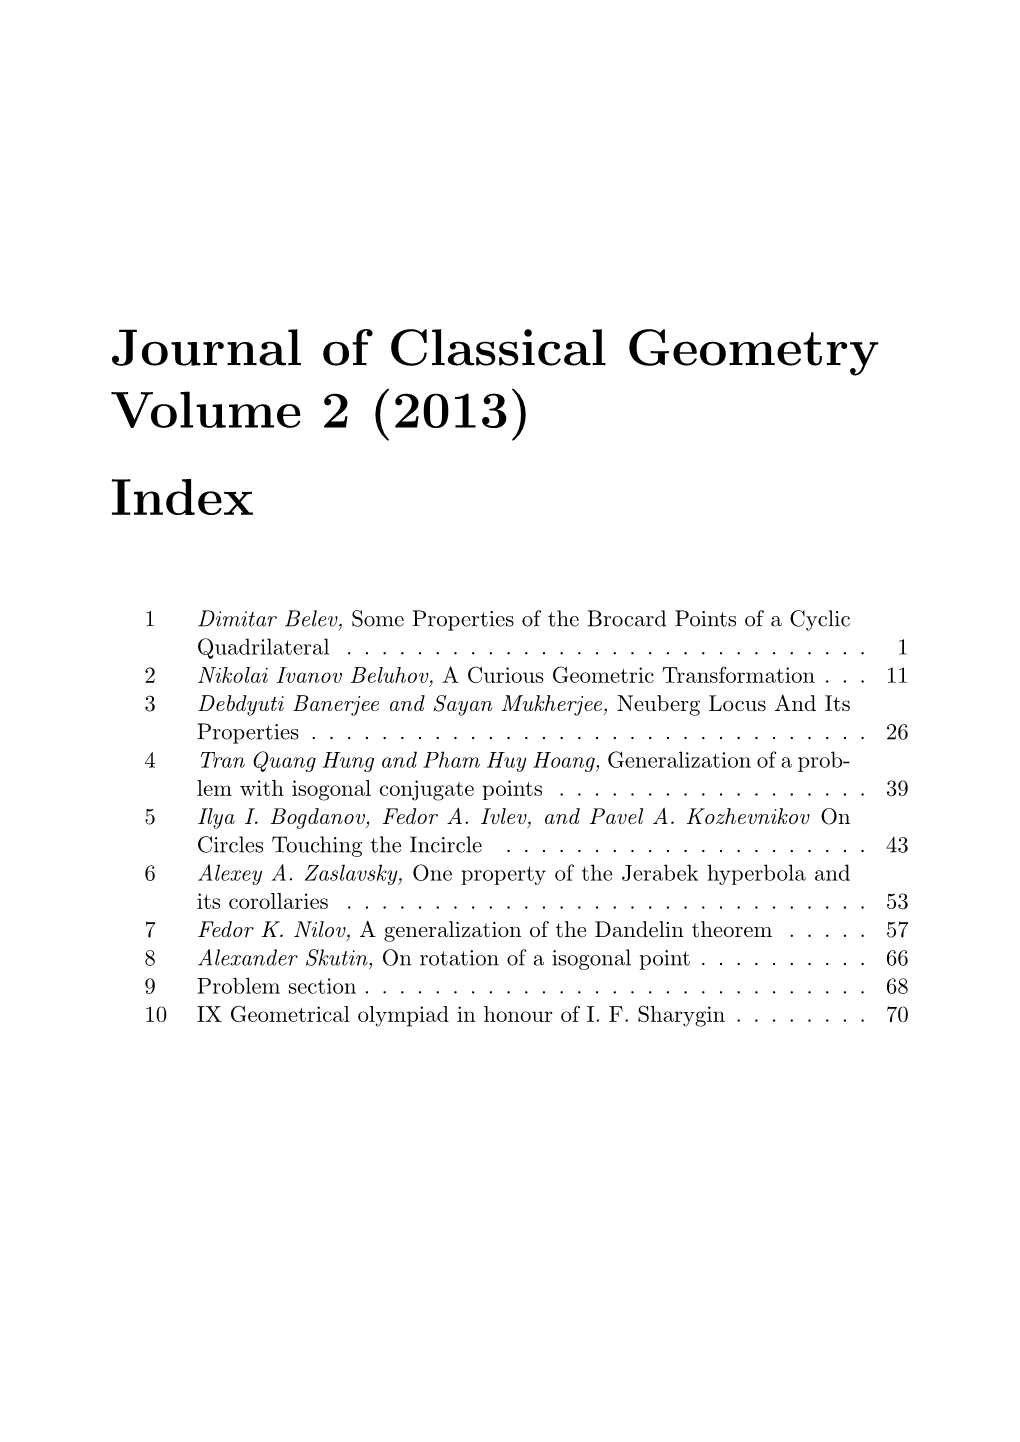 Journal of Classical Geometry Volume 2 (2013) Index